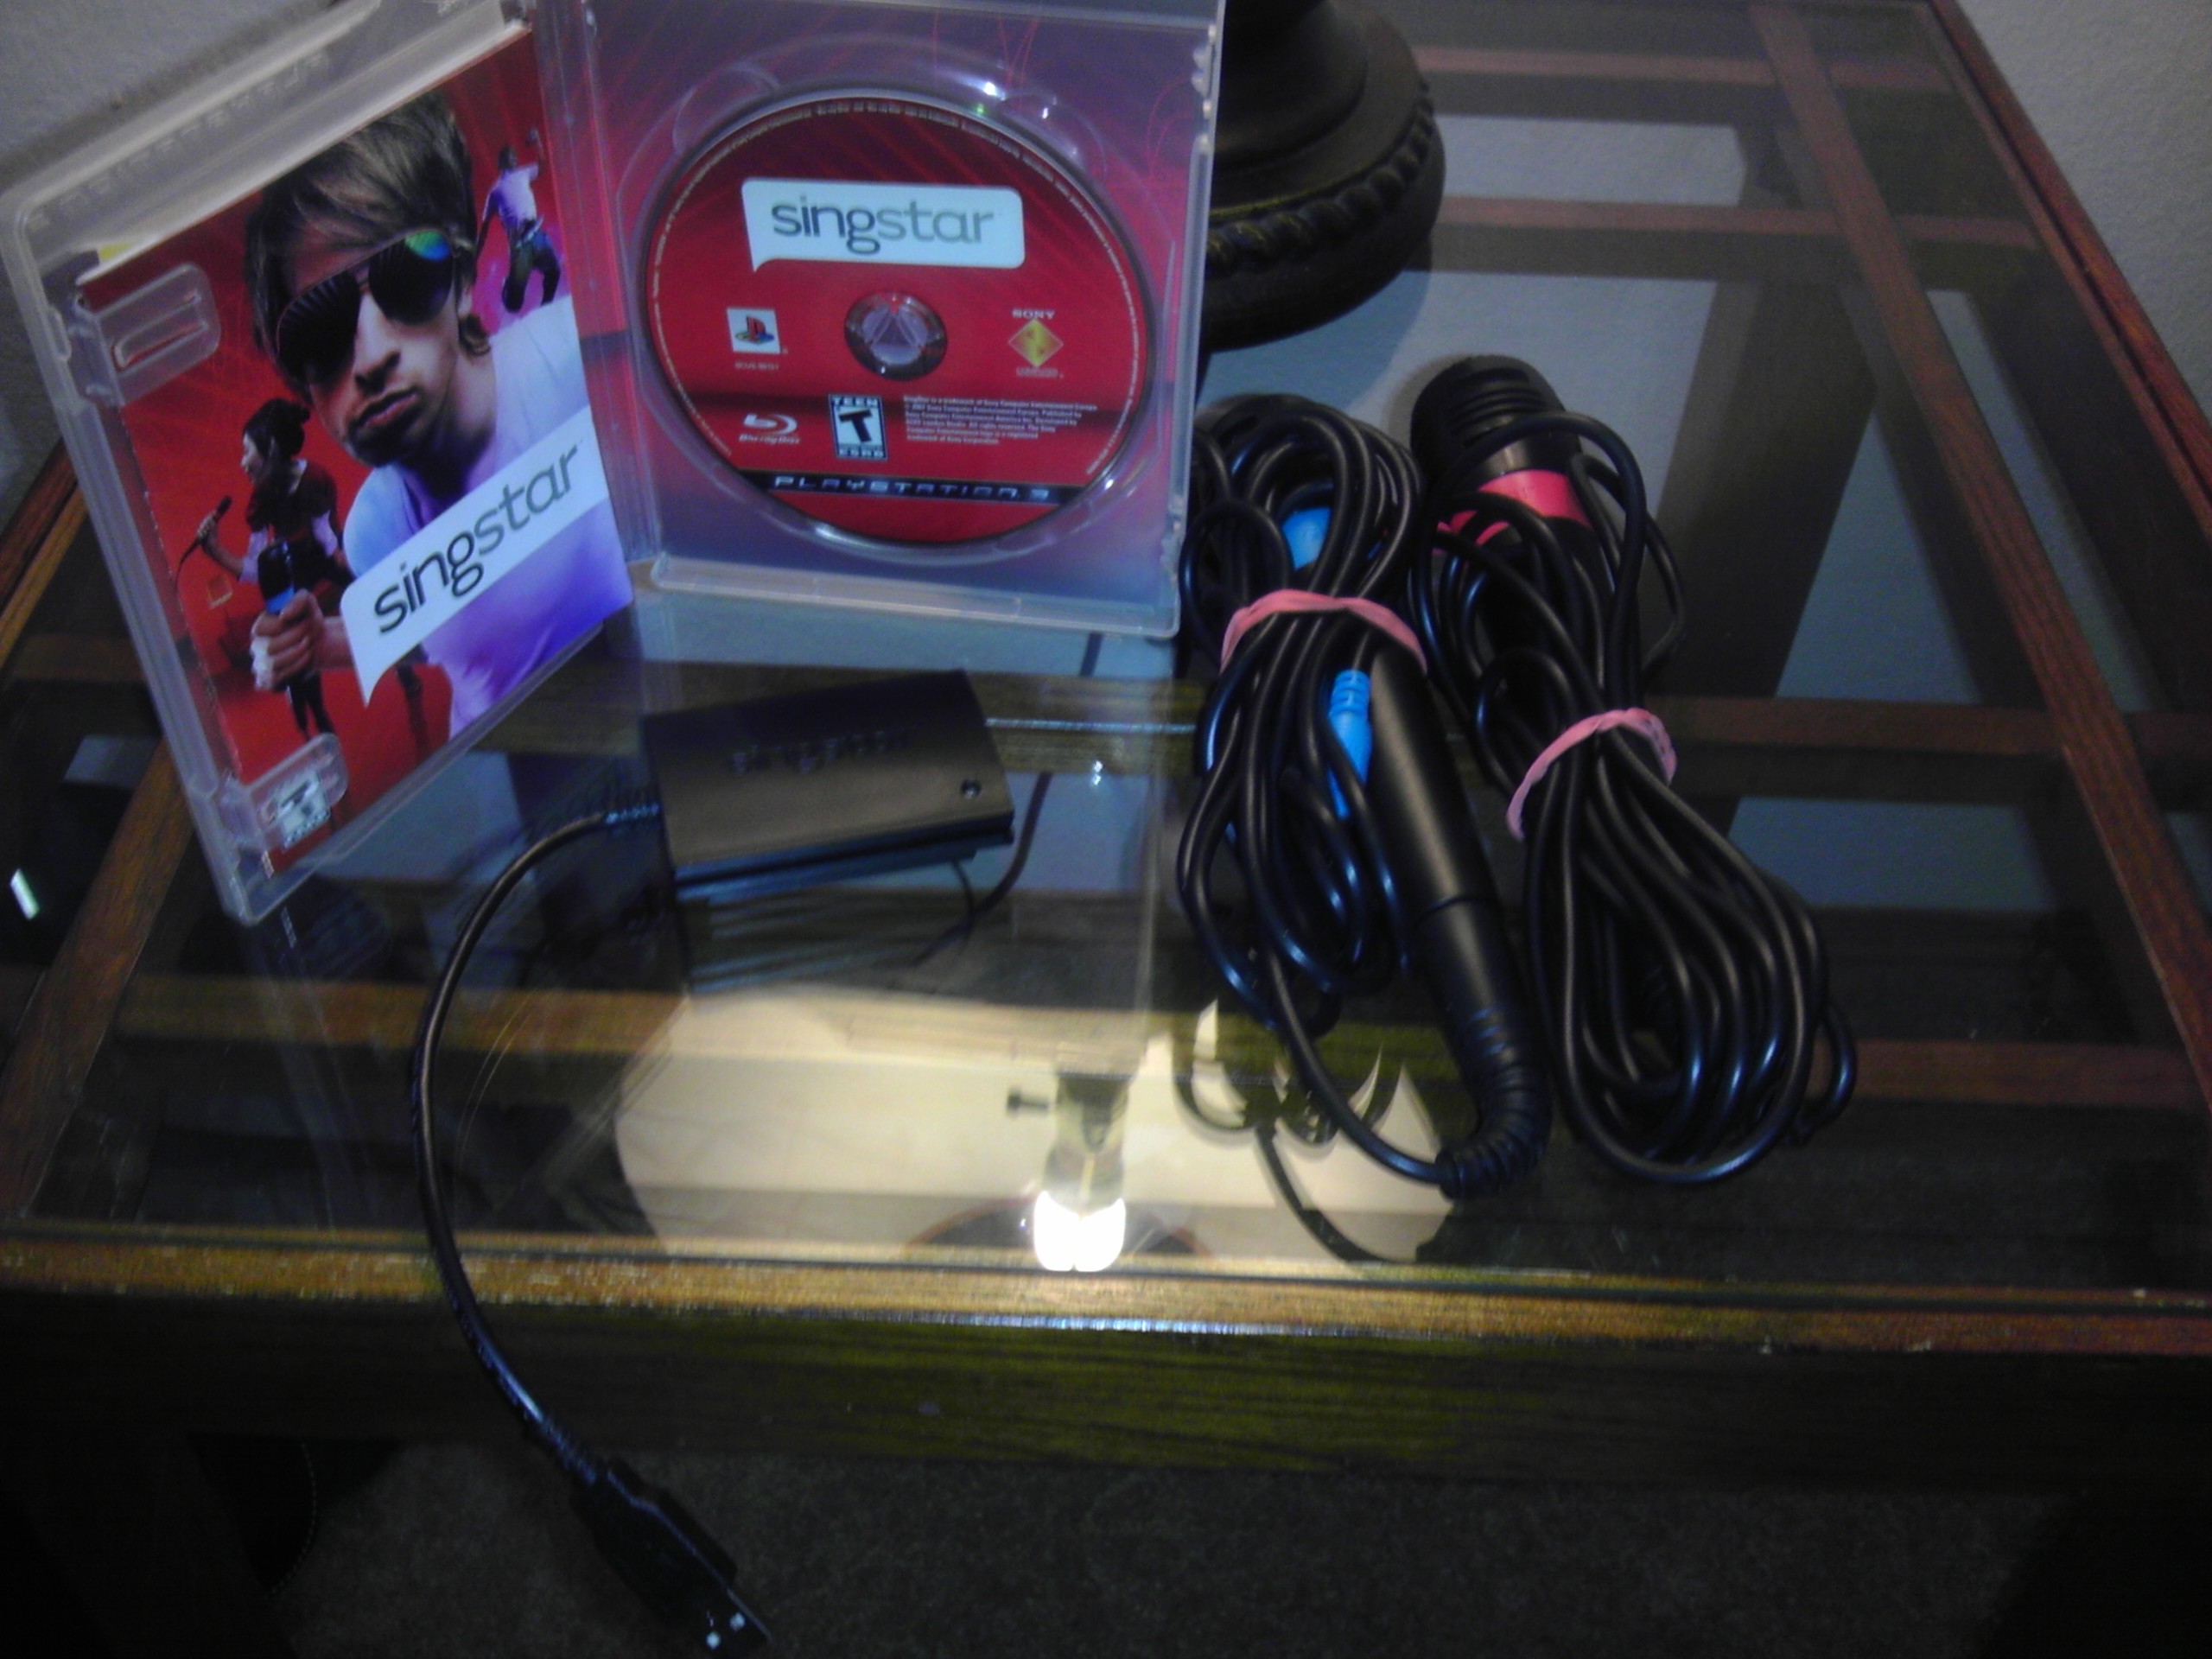 PS3 singstar with 2 microphones